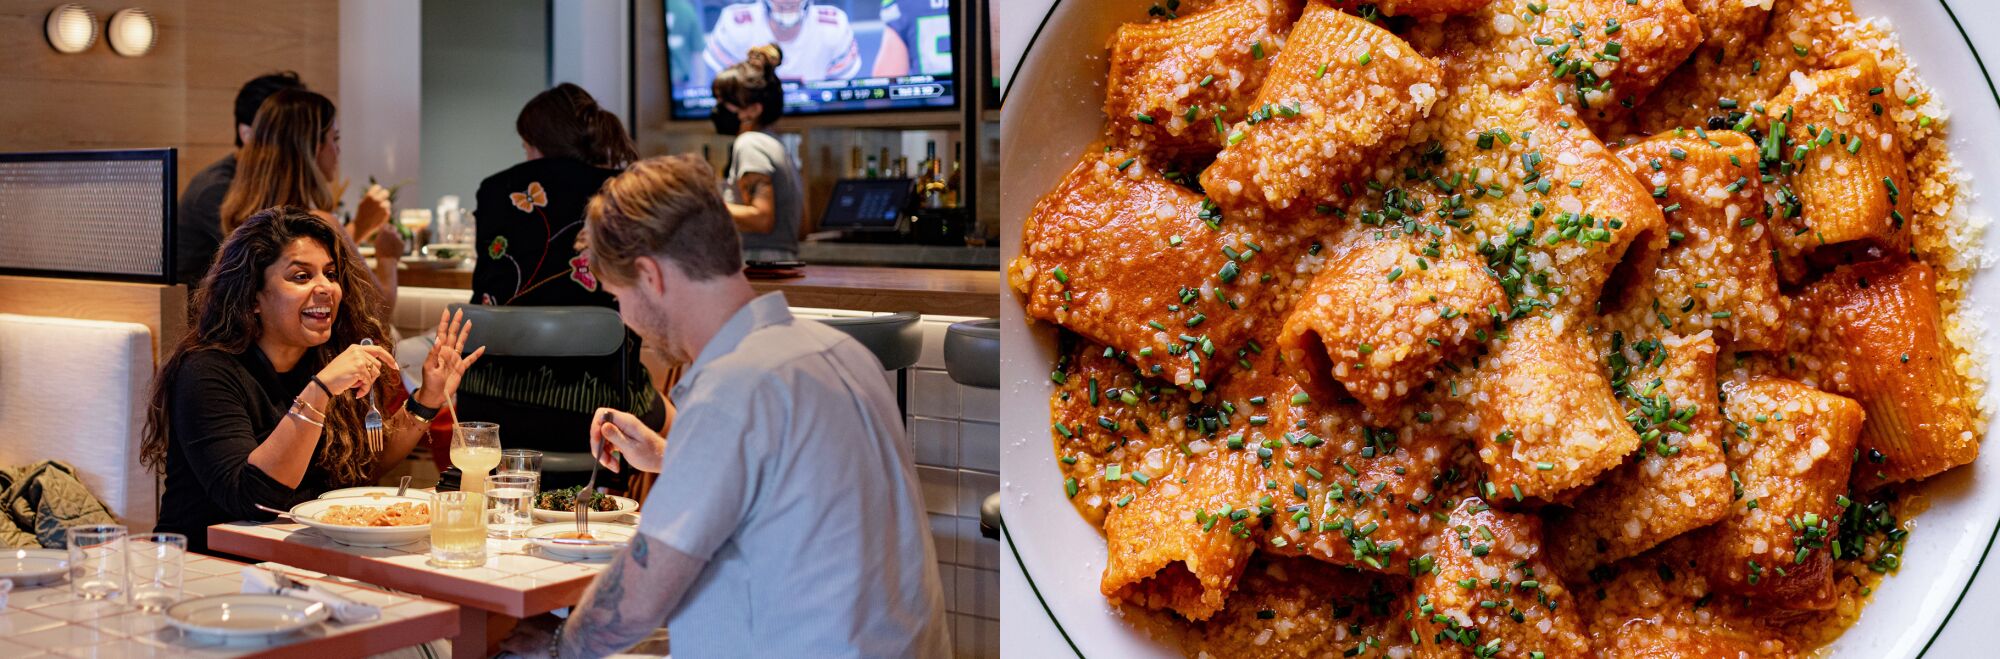 Left: People dine in a restaurant with a TV screen showing the night's in view. Right: A plate of malai rigatoni.